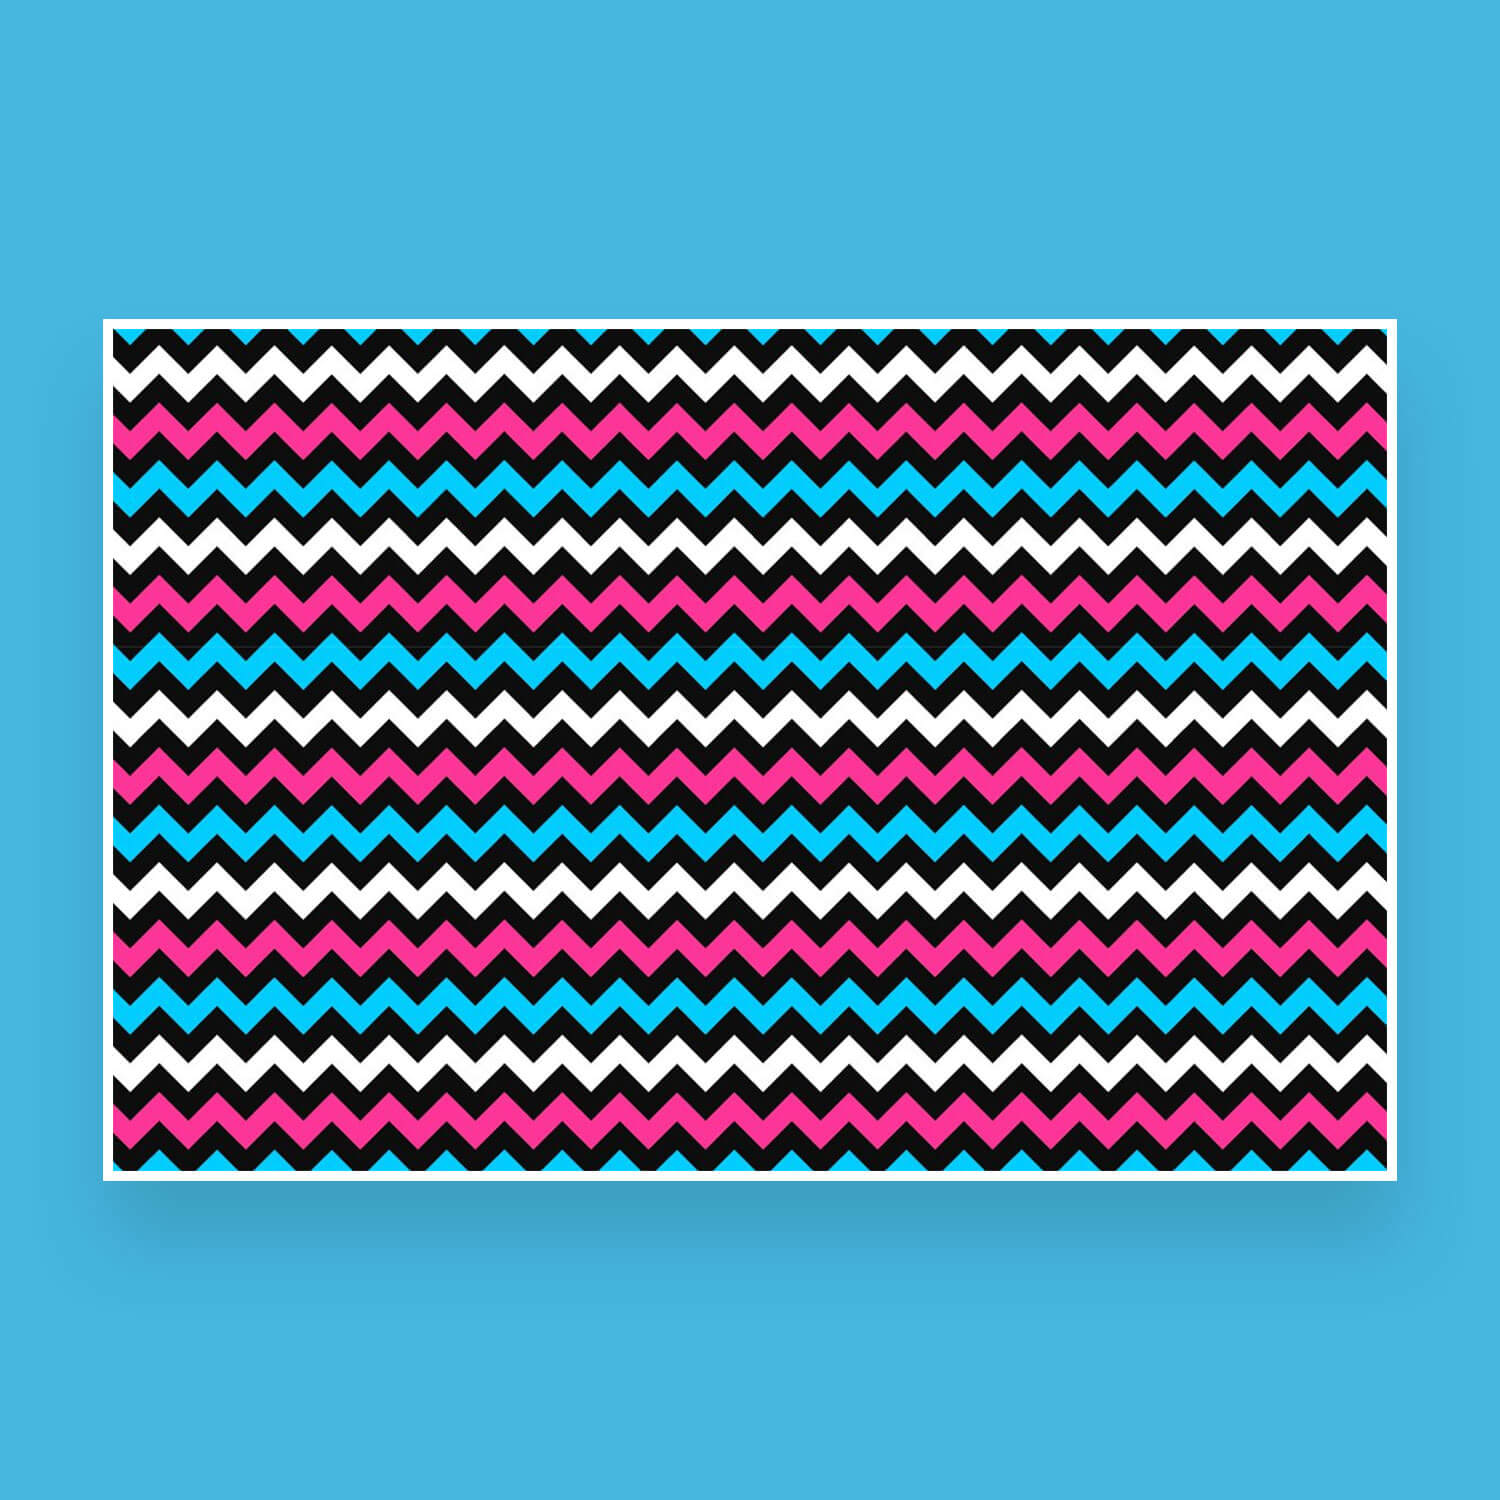 Colored zigzag lines on a blue background.